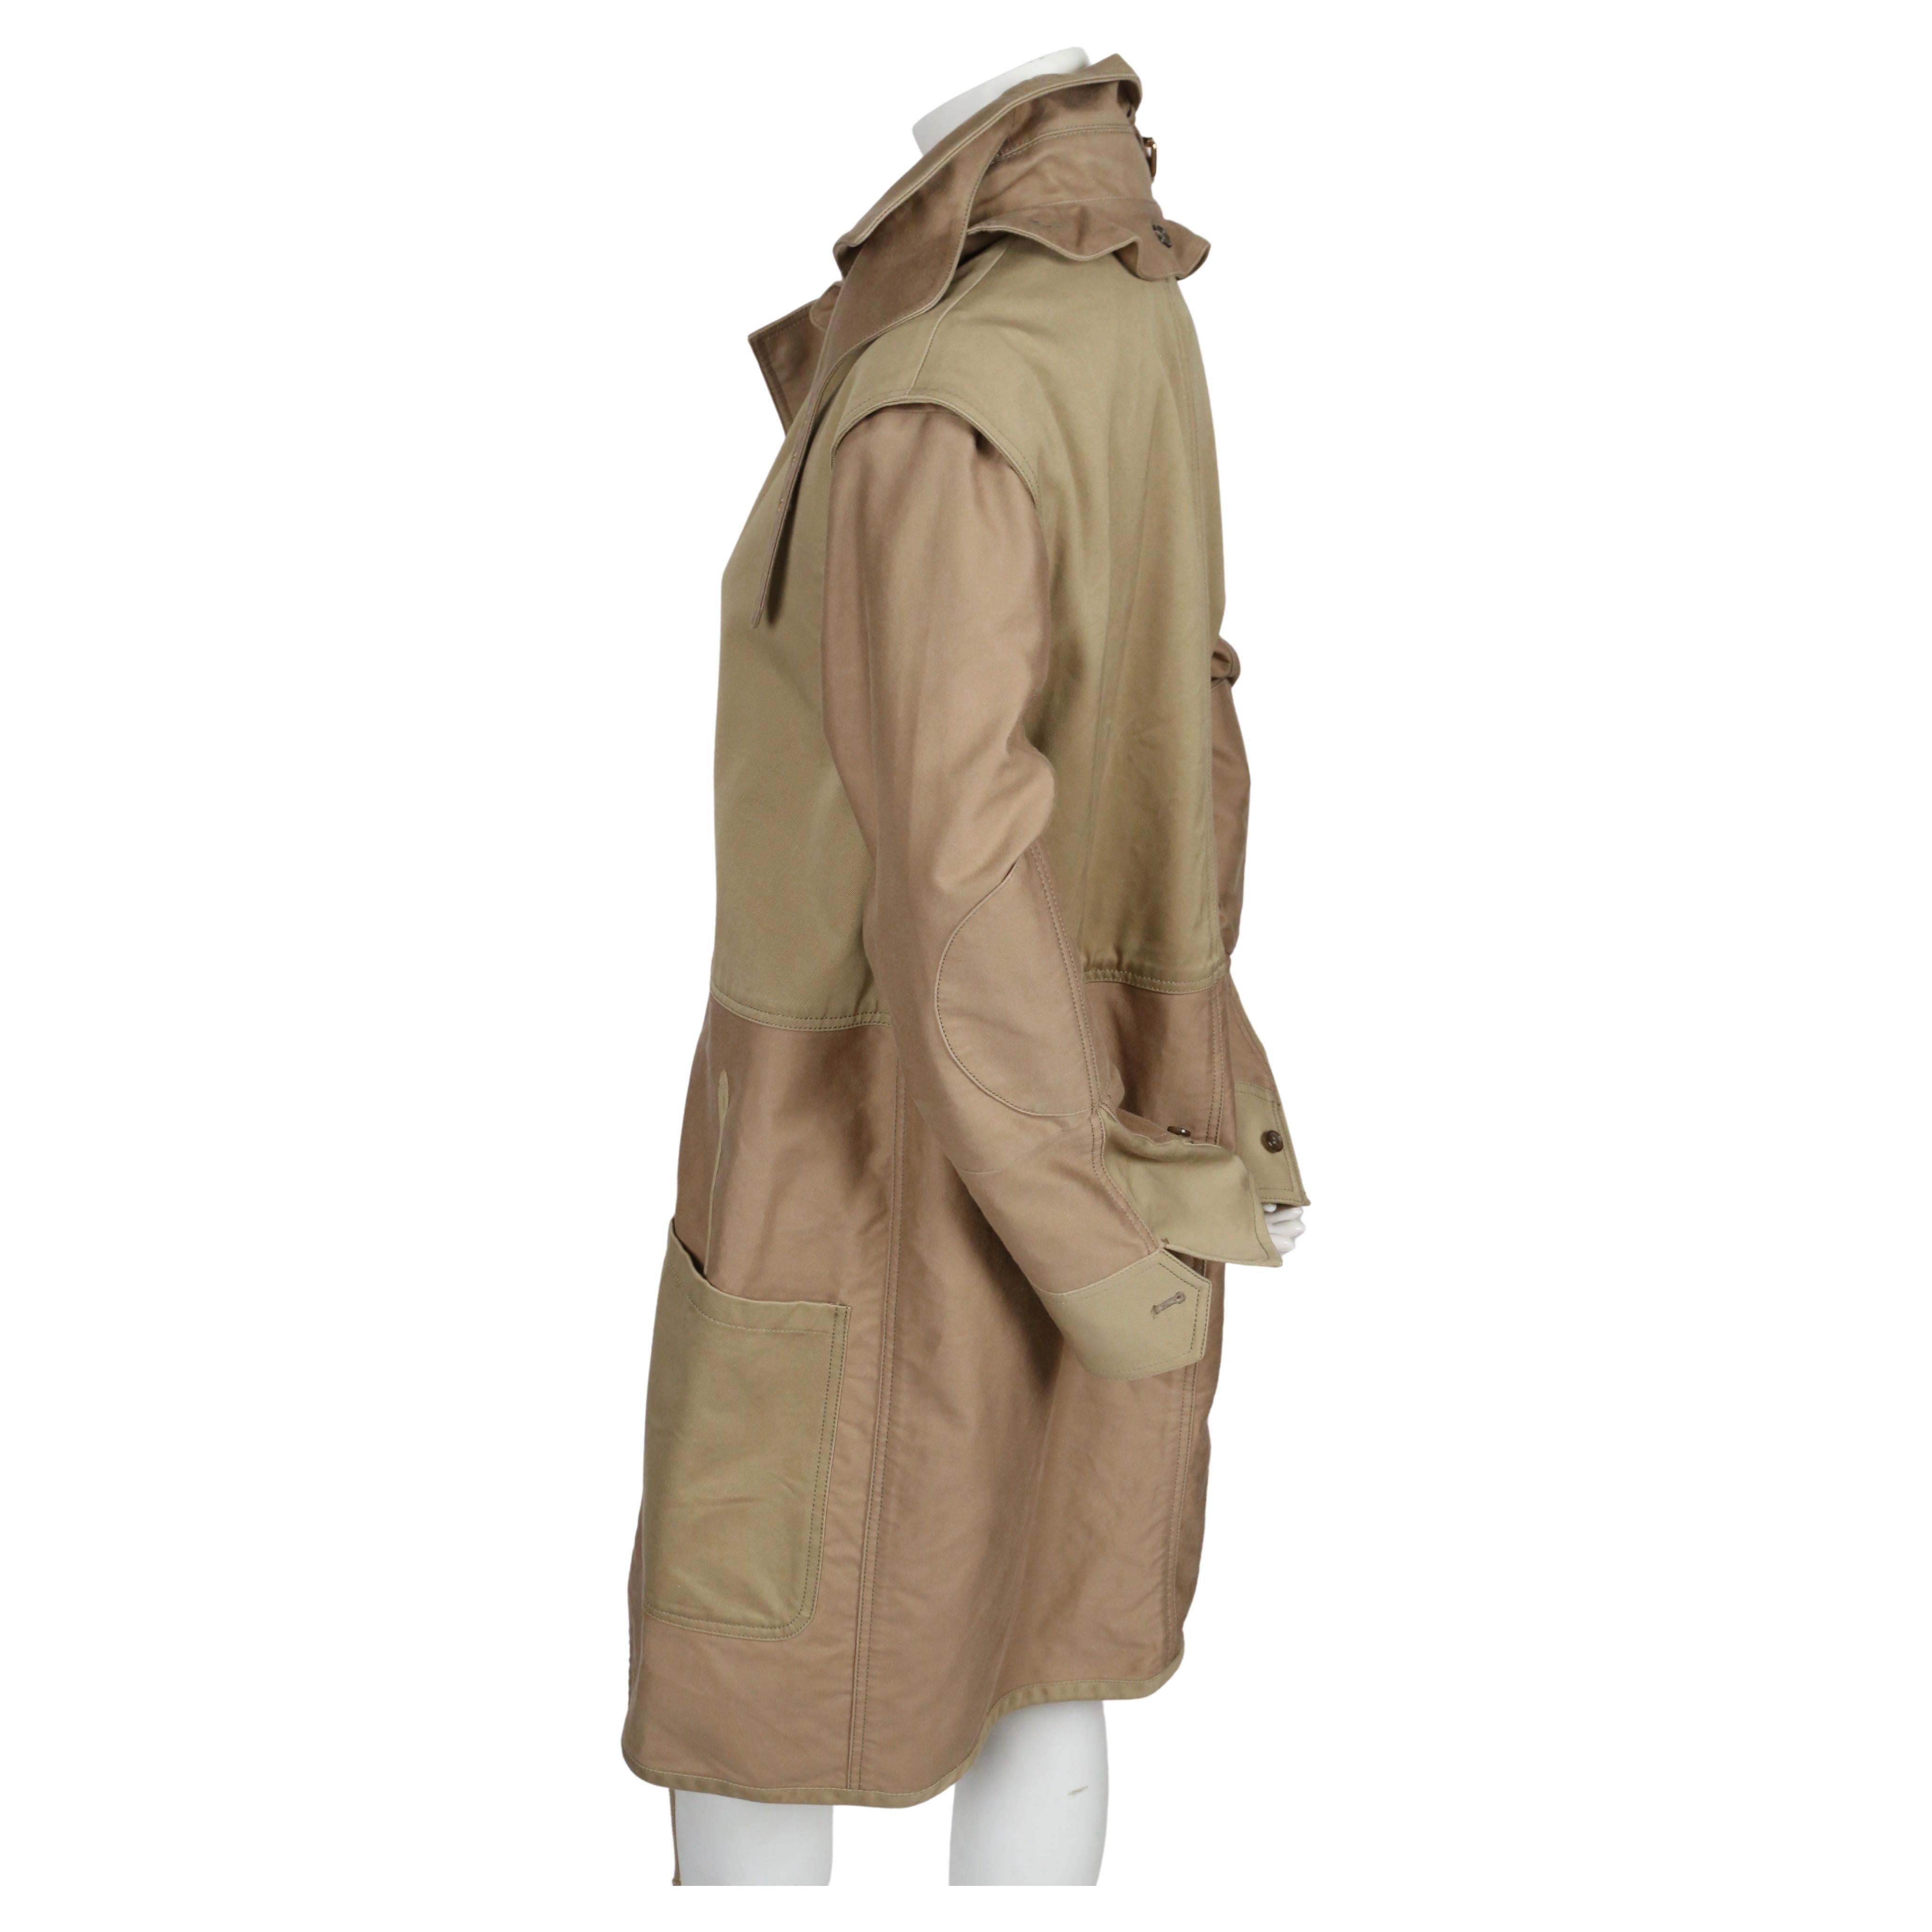 2010 CELINE by PHOEBE PHILO khaki oversized coat In Good Condition For Sale In San Fransisco, CA